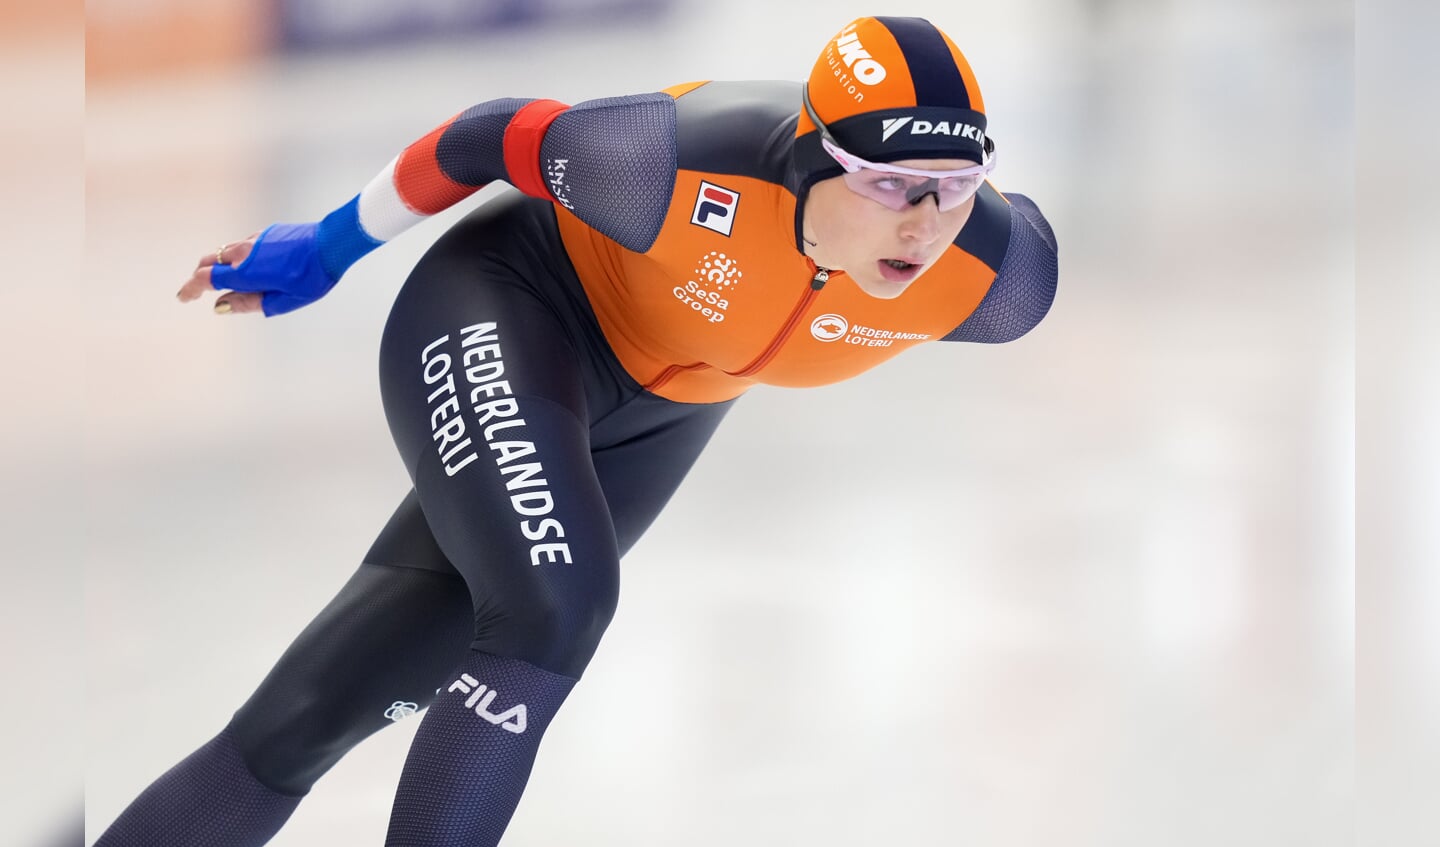 INZELL, GERMANY - MARCH 9: Joy Beune of The Netherlands during the ISU World Speed Skating Allround Championships at Max Aicher Arena on March 9, 2024 in Inzell, Germany. (Photo by Douwe Bijlsma/Orange Pictures)